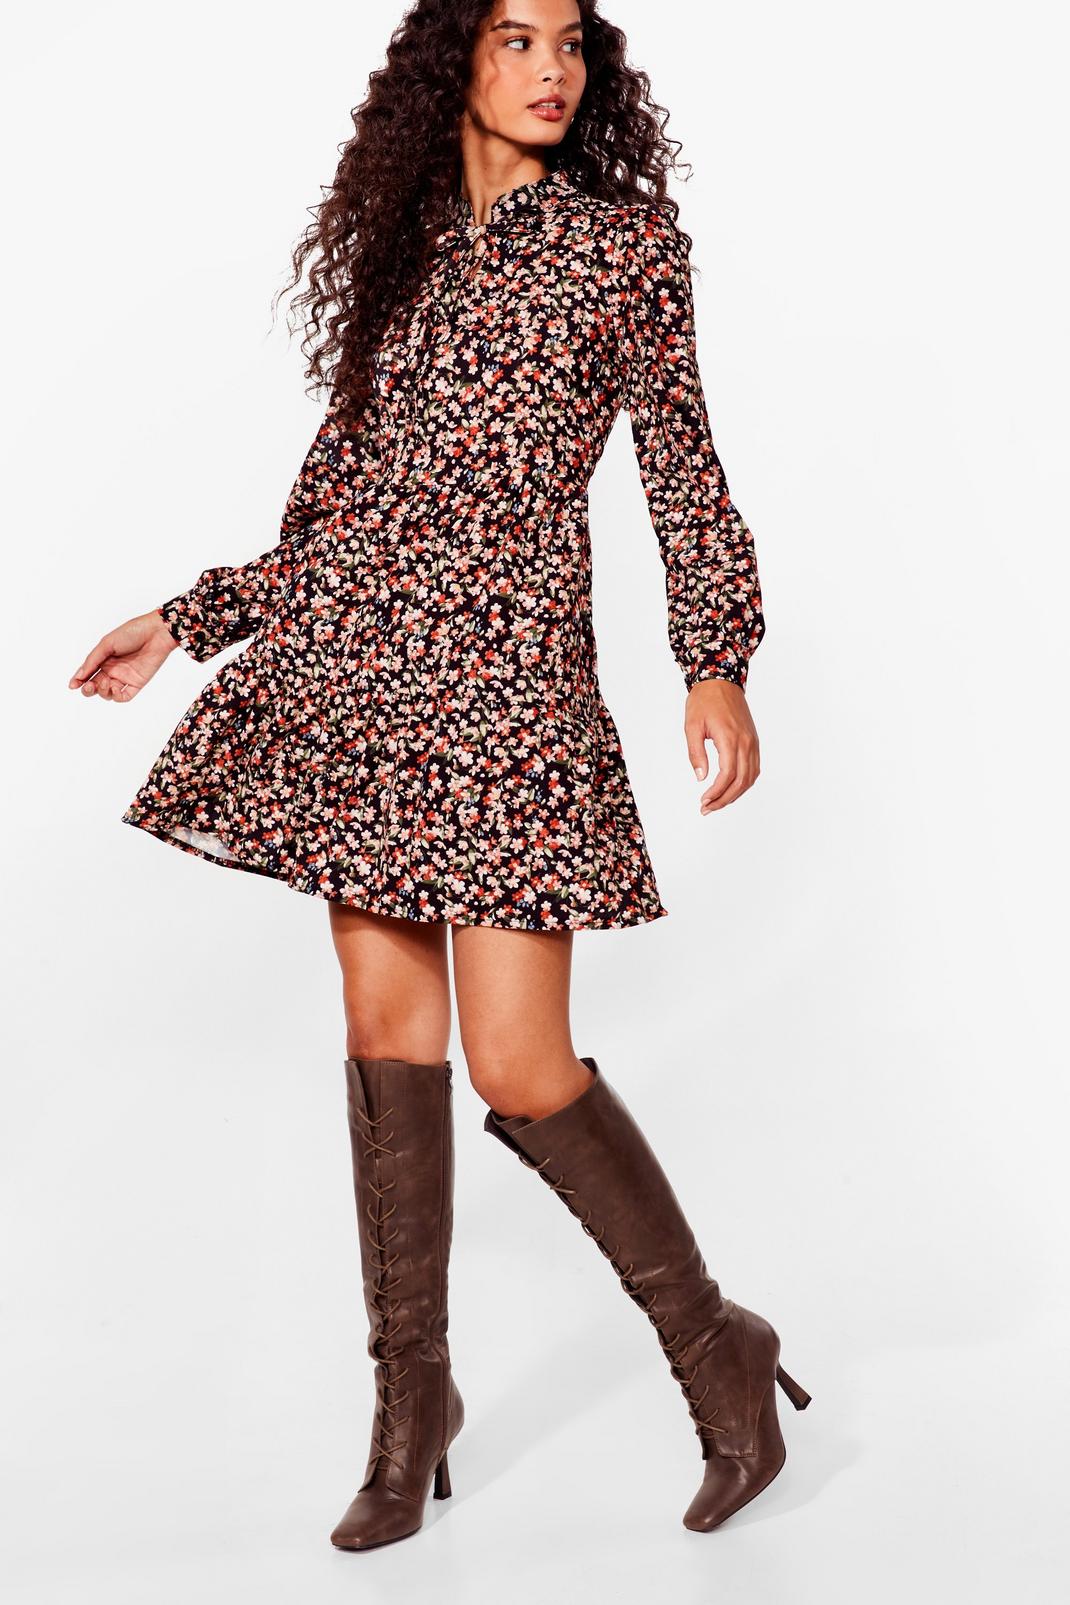 Lace Up Heeled Knee High Boots image number 1